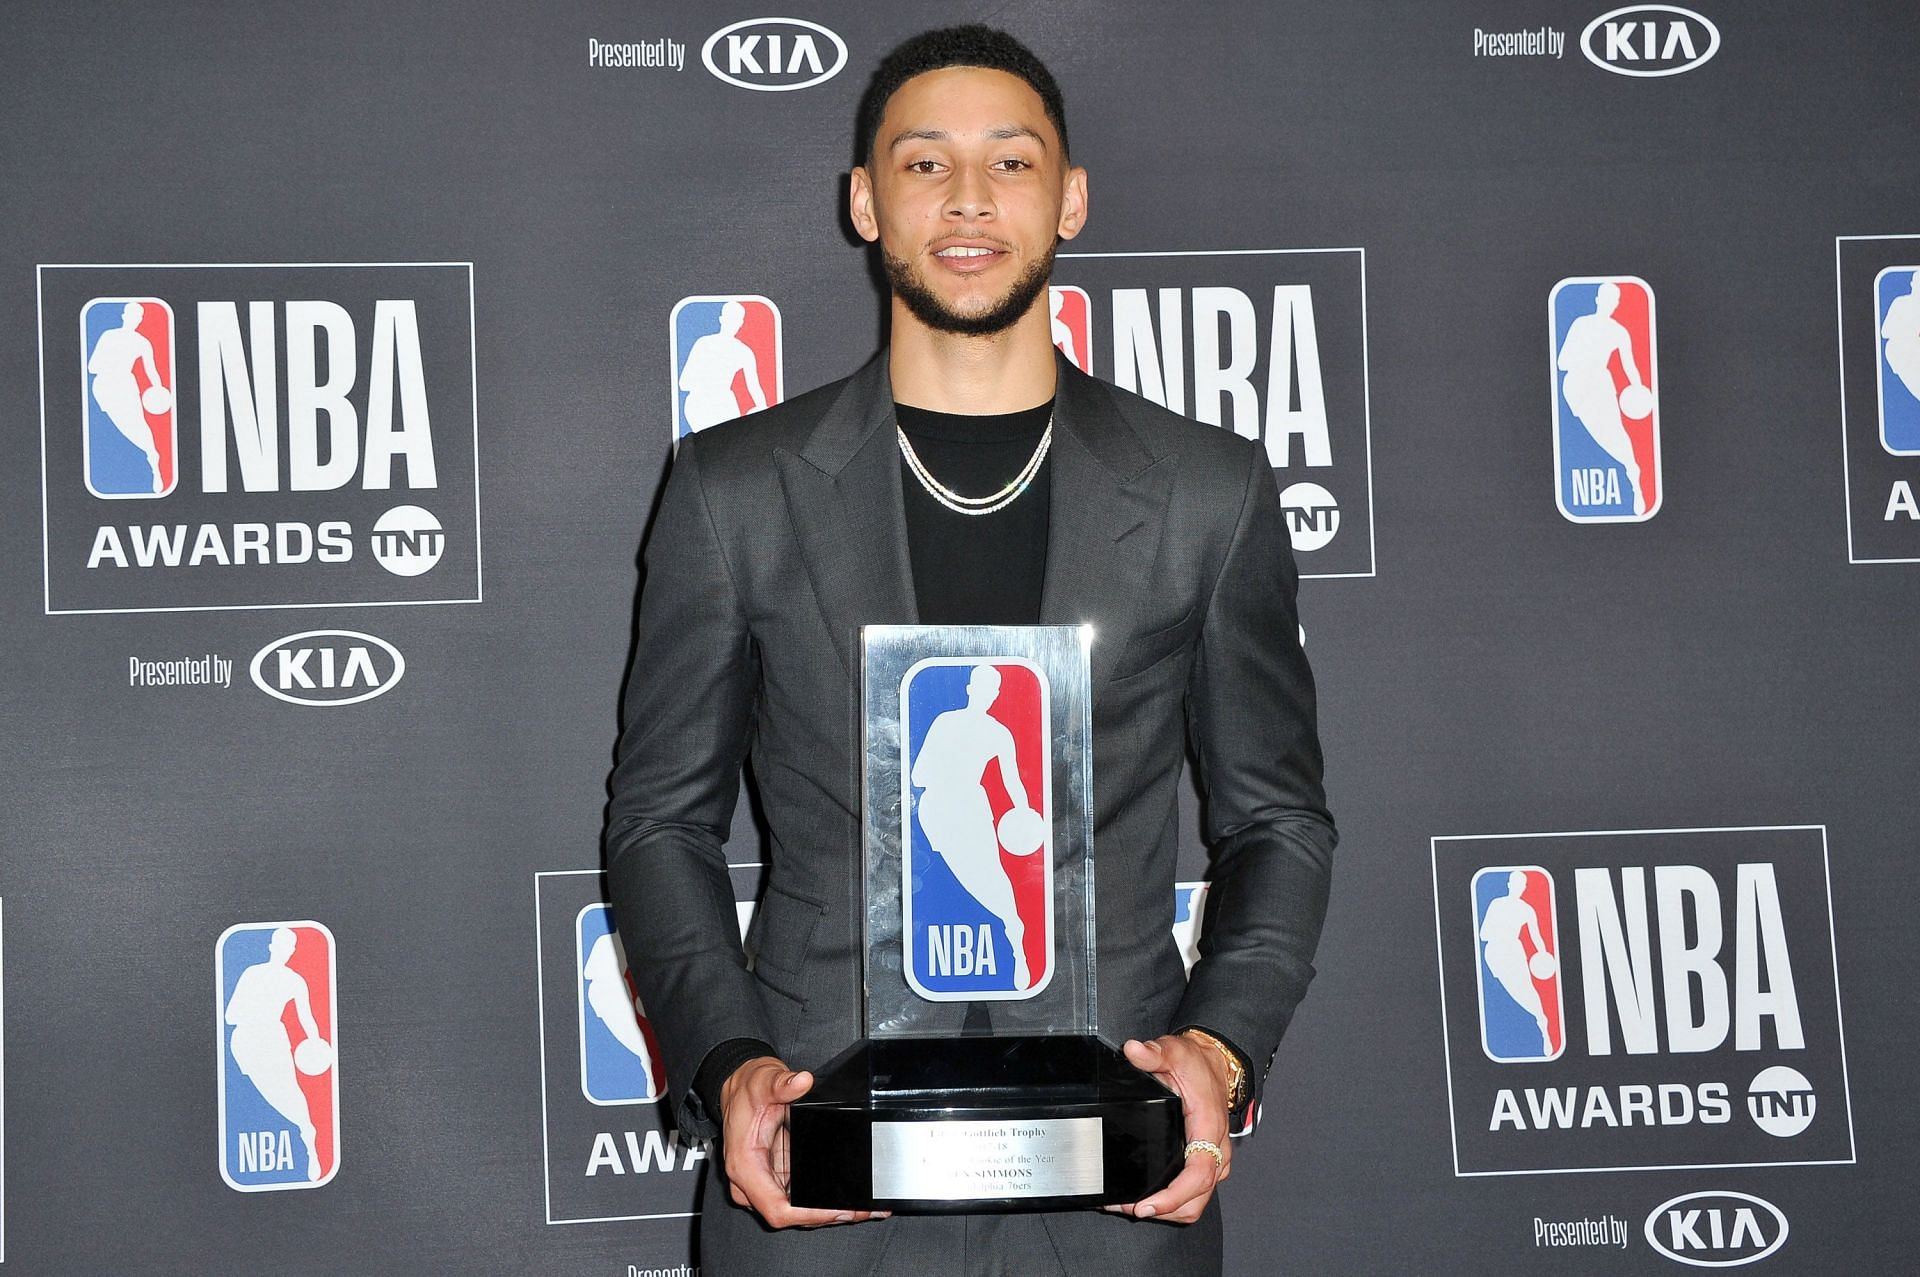 Ben Simmons Wins 2018 NBA Rookie of the Year Award over Donovan Mitchell, News, Scores, Highlights, Stats, and Rumors